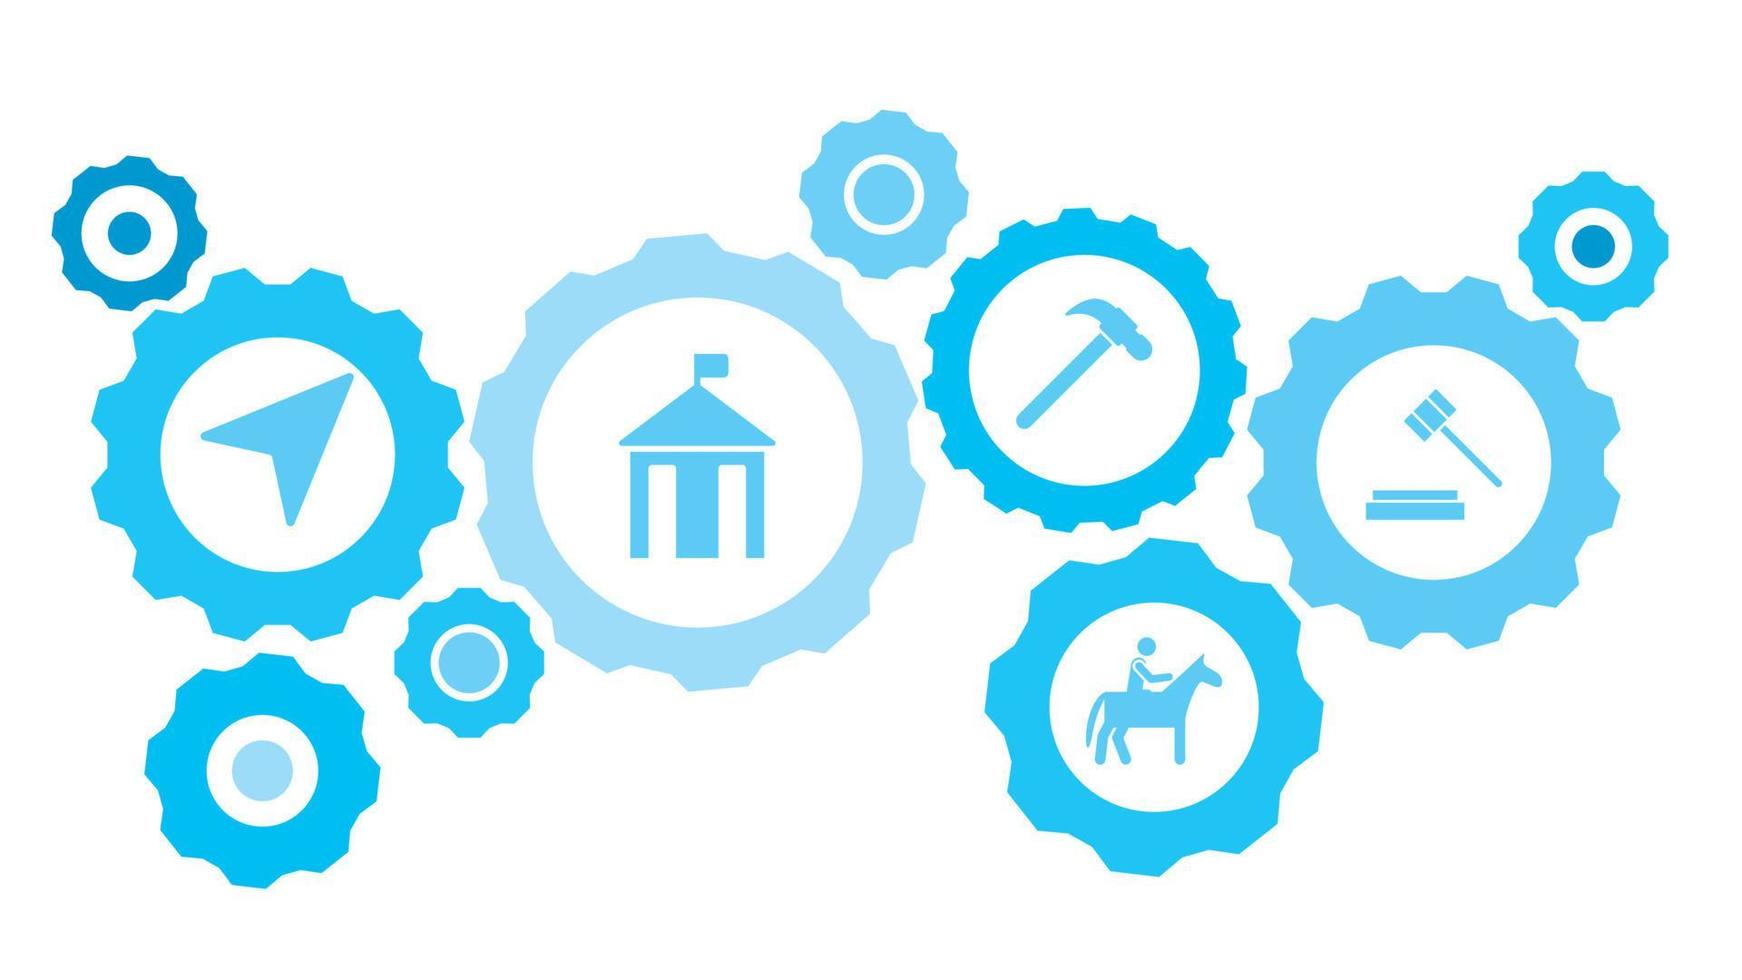 Trial hammer gear blue icon set. Abstract background with connected gears and icons for logistic, service, shipping, distribution, transport, market, communicate concepts vector